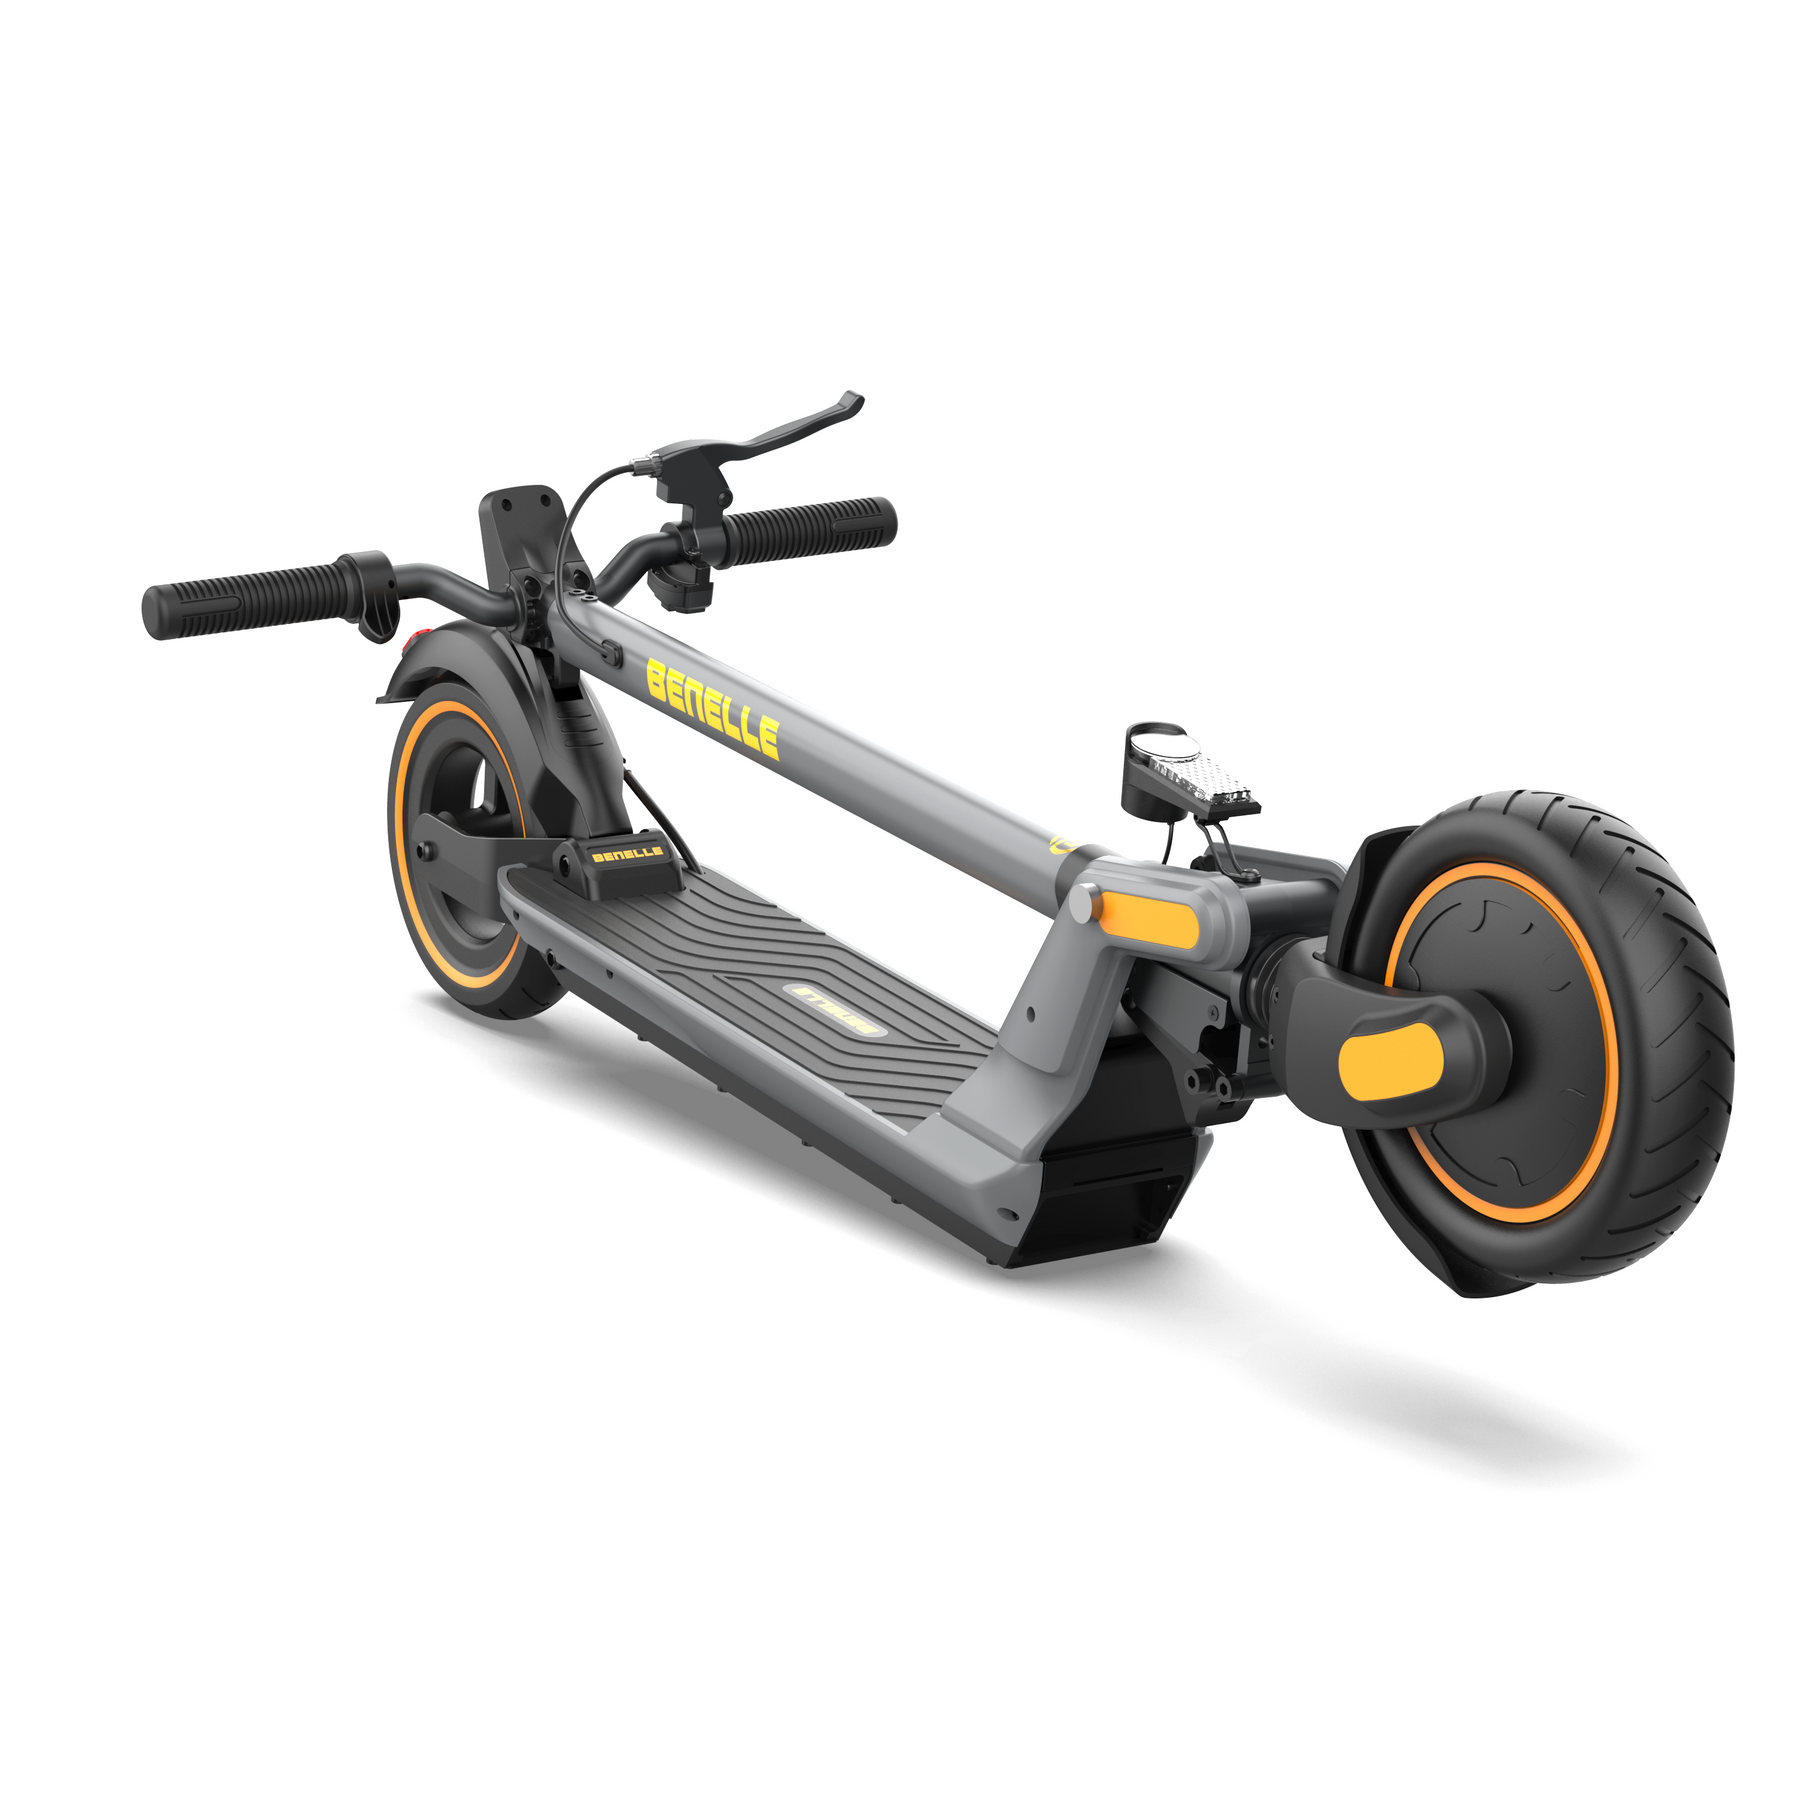 Benelle S500L Electric Scooter